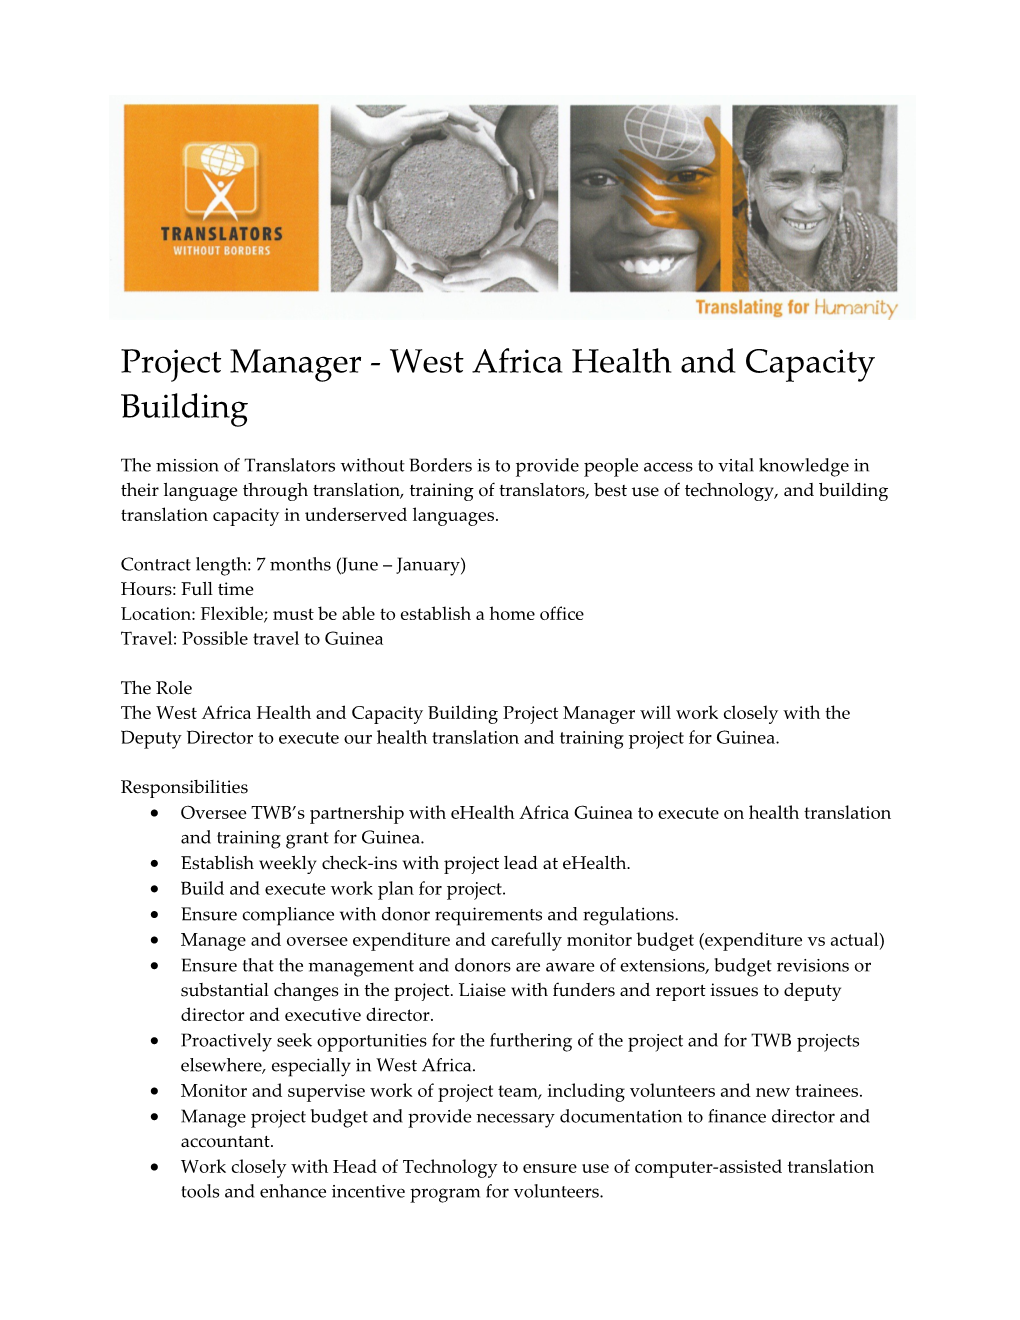 Project Manager - West Africa Health and Capacity Building